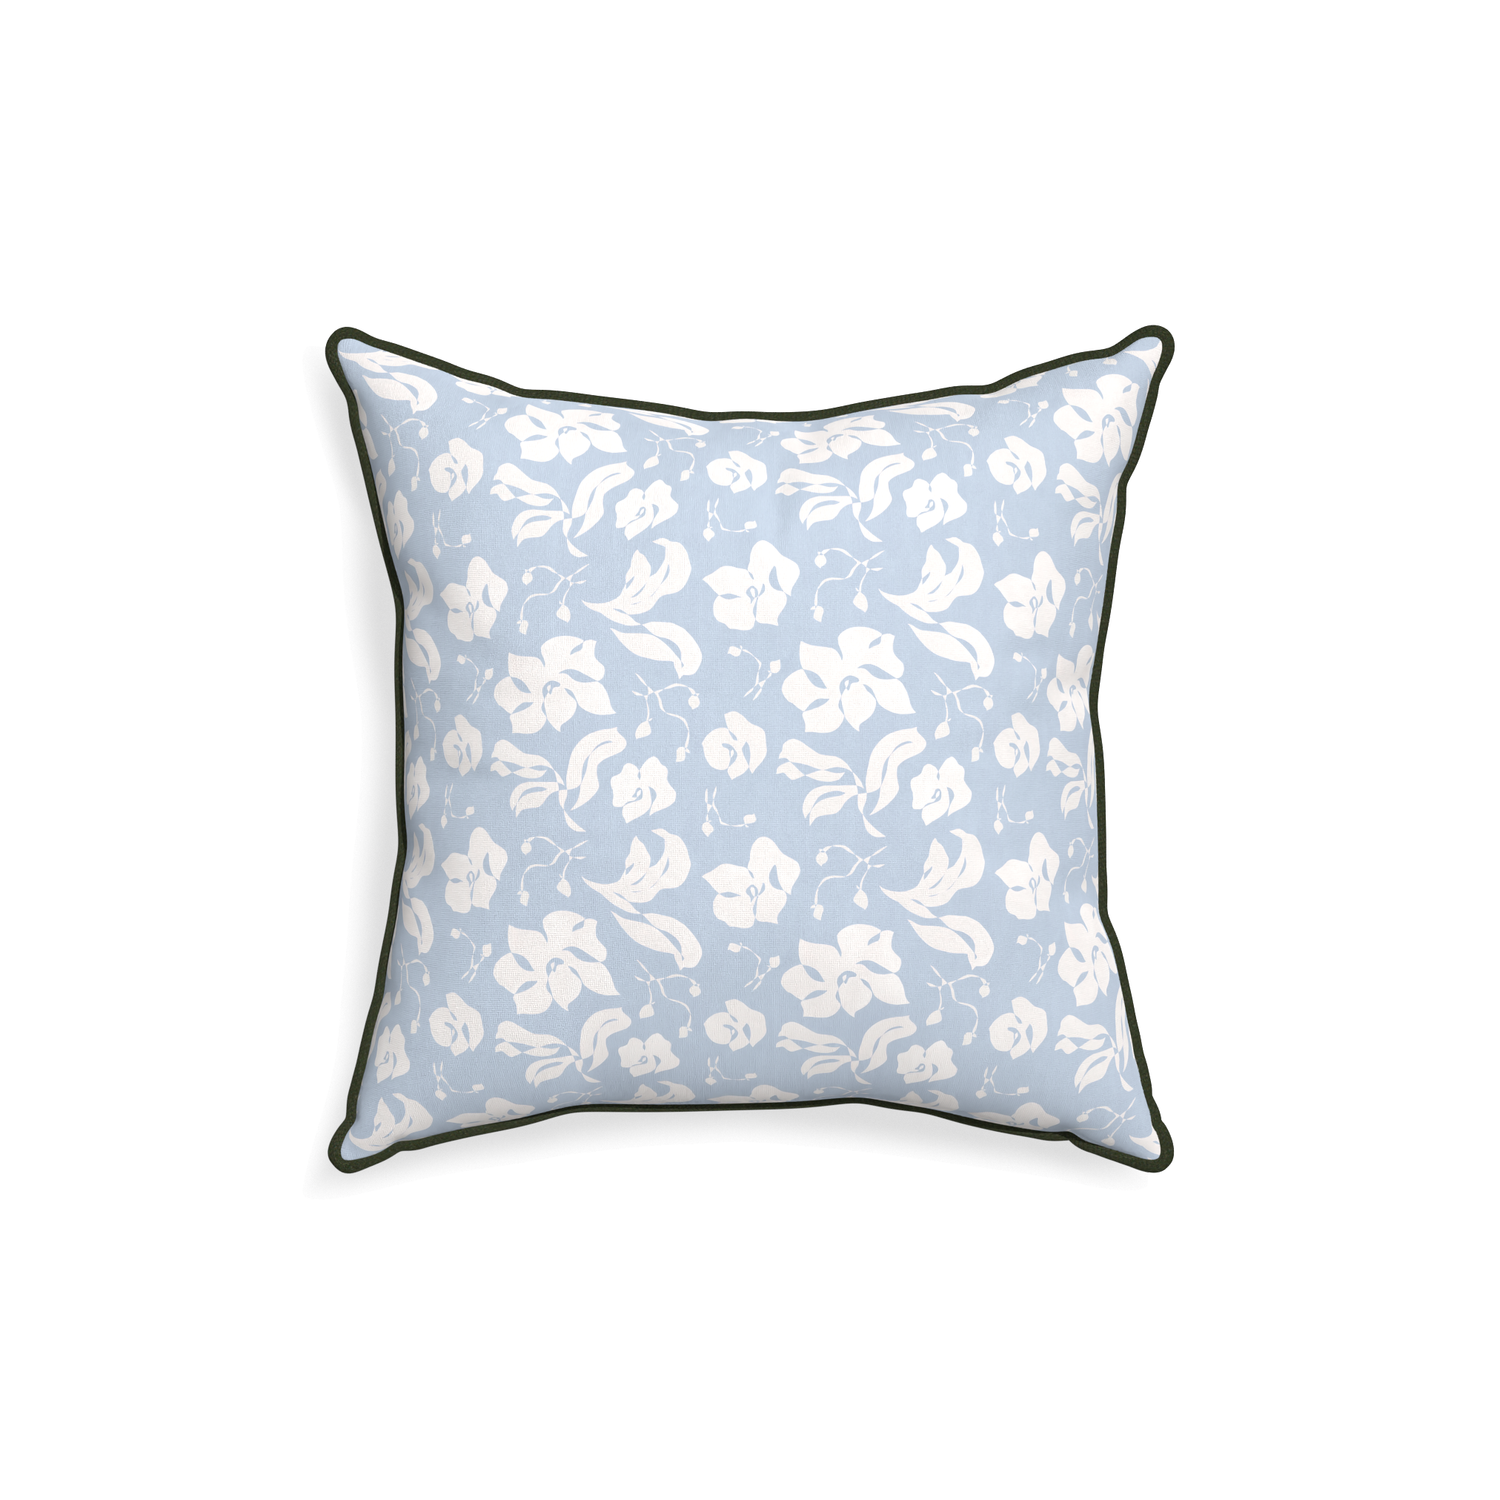 18-square georgia custom cornflower blue floralpillow with f piping on white background